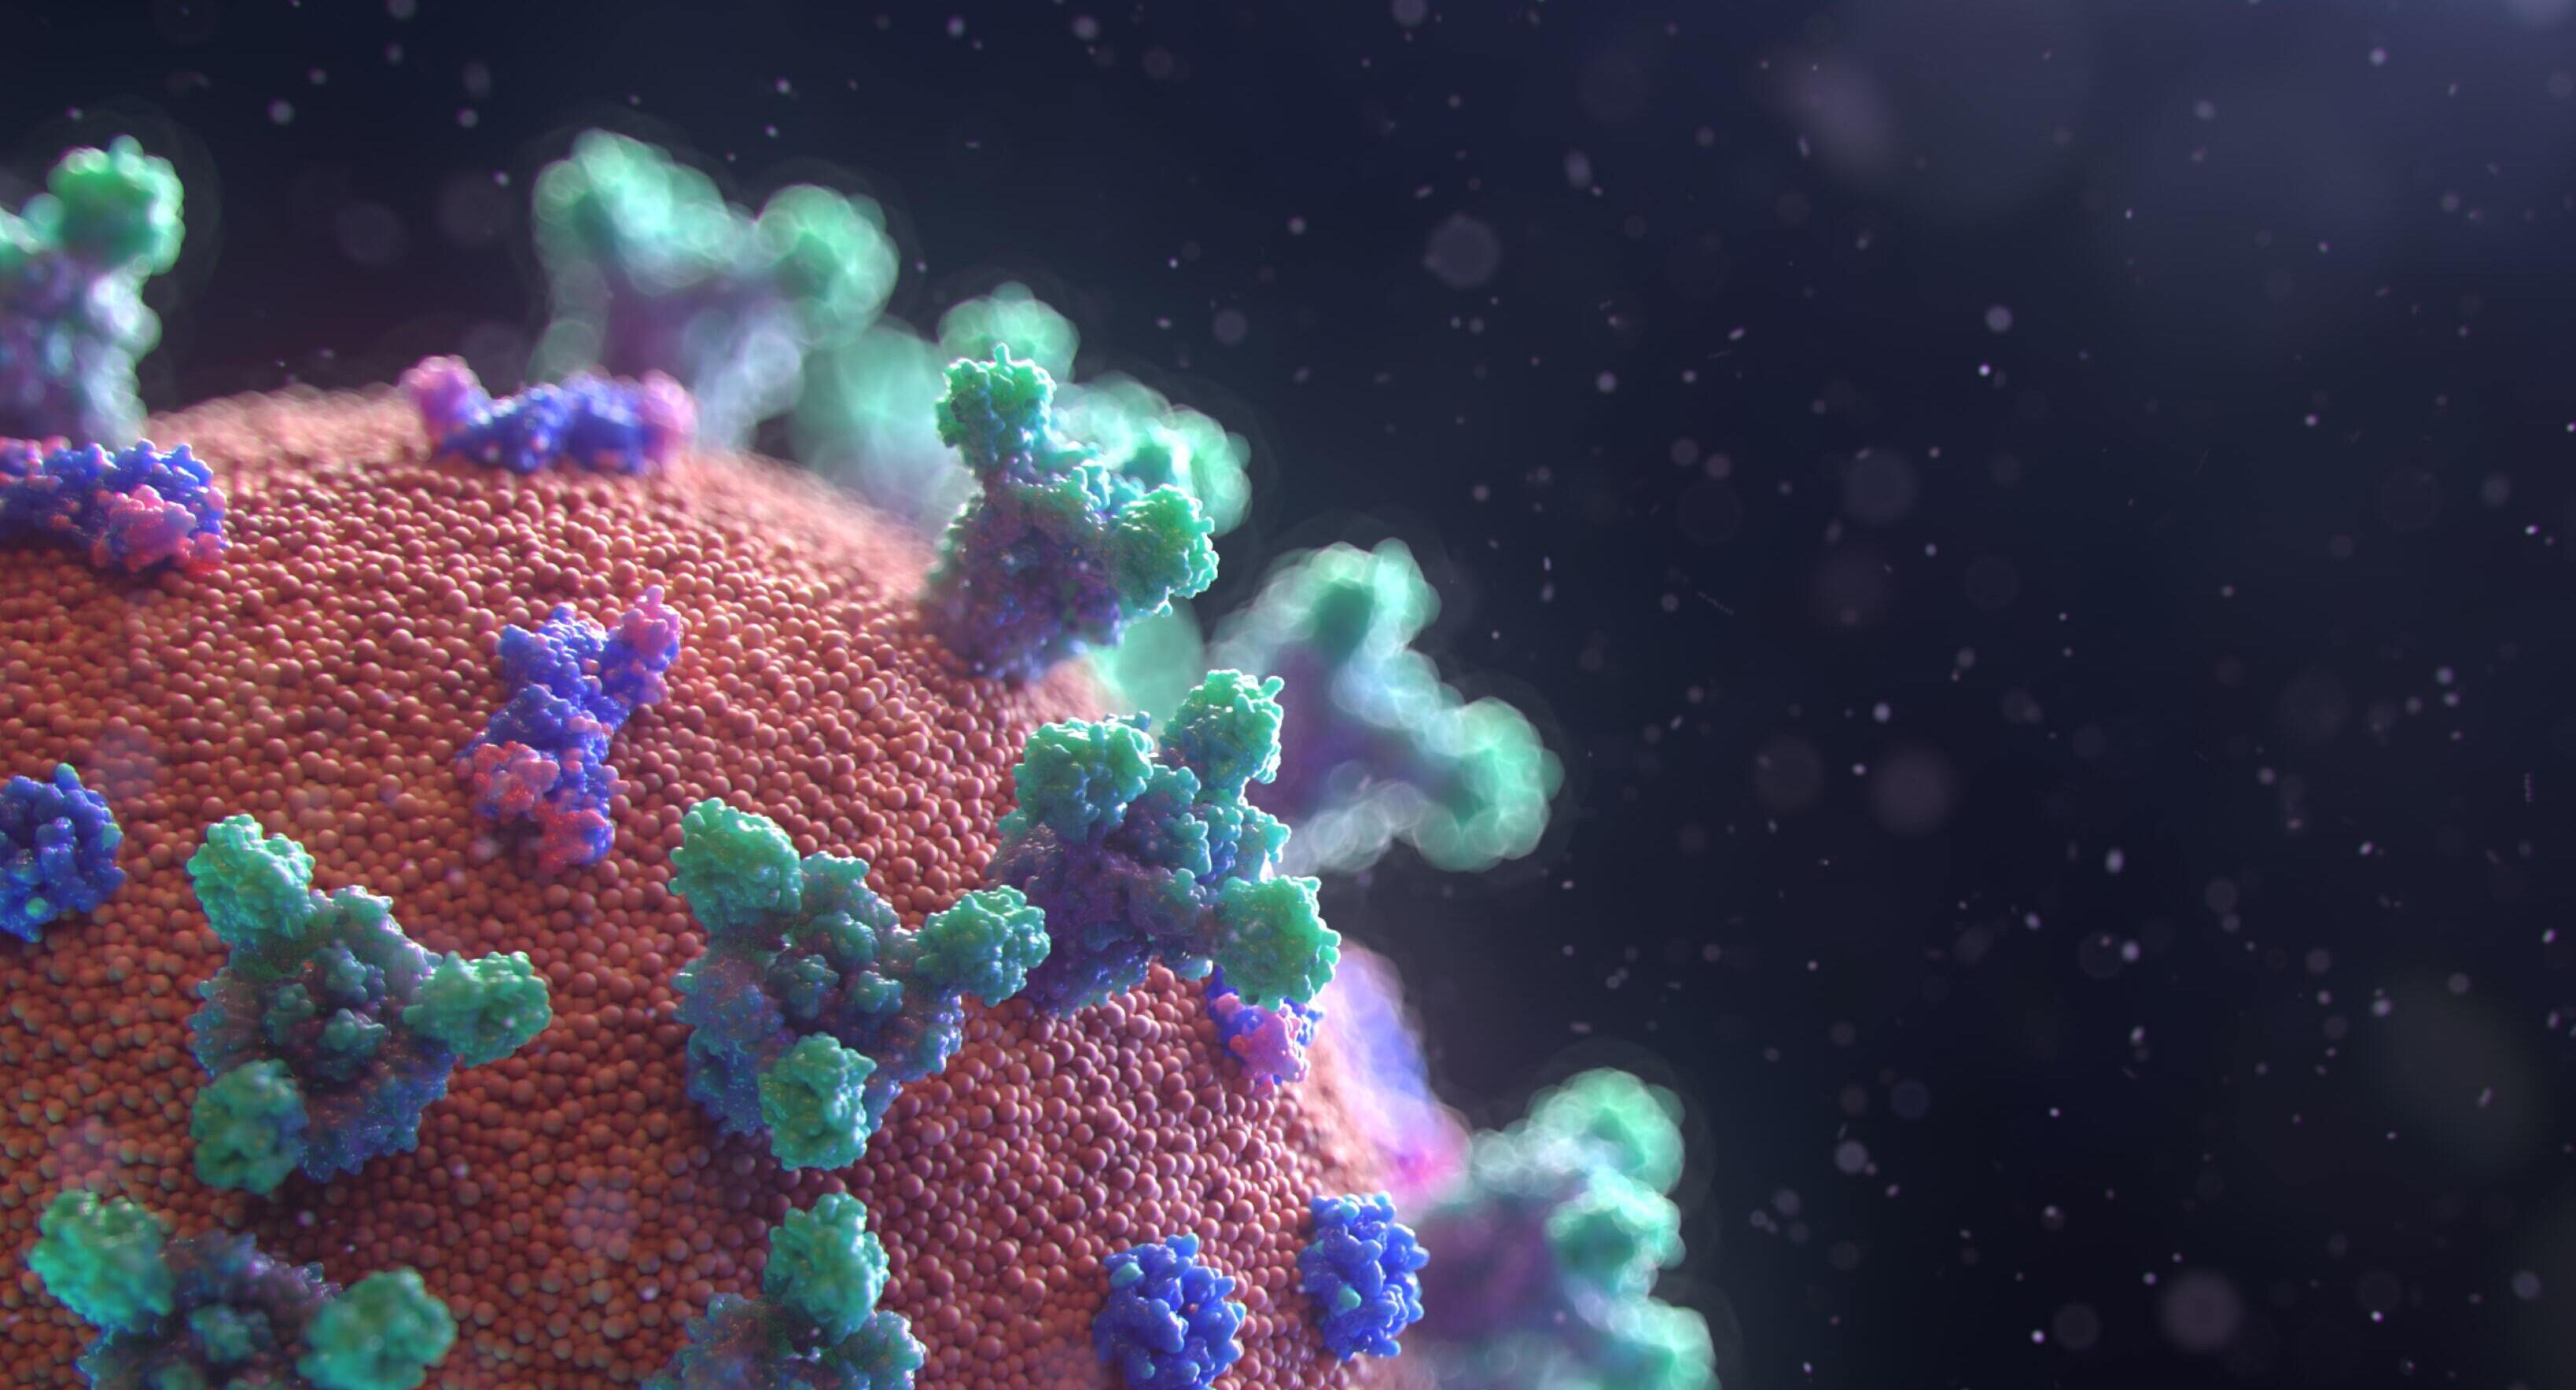 Close up image of the COVID-19 virus